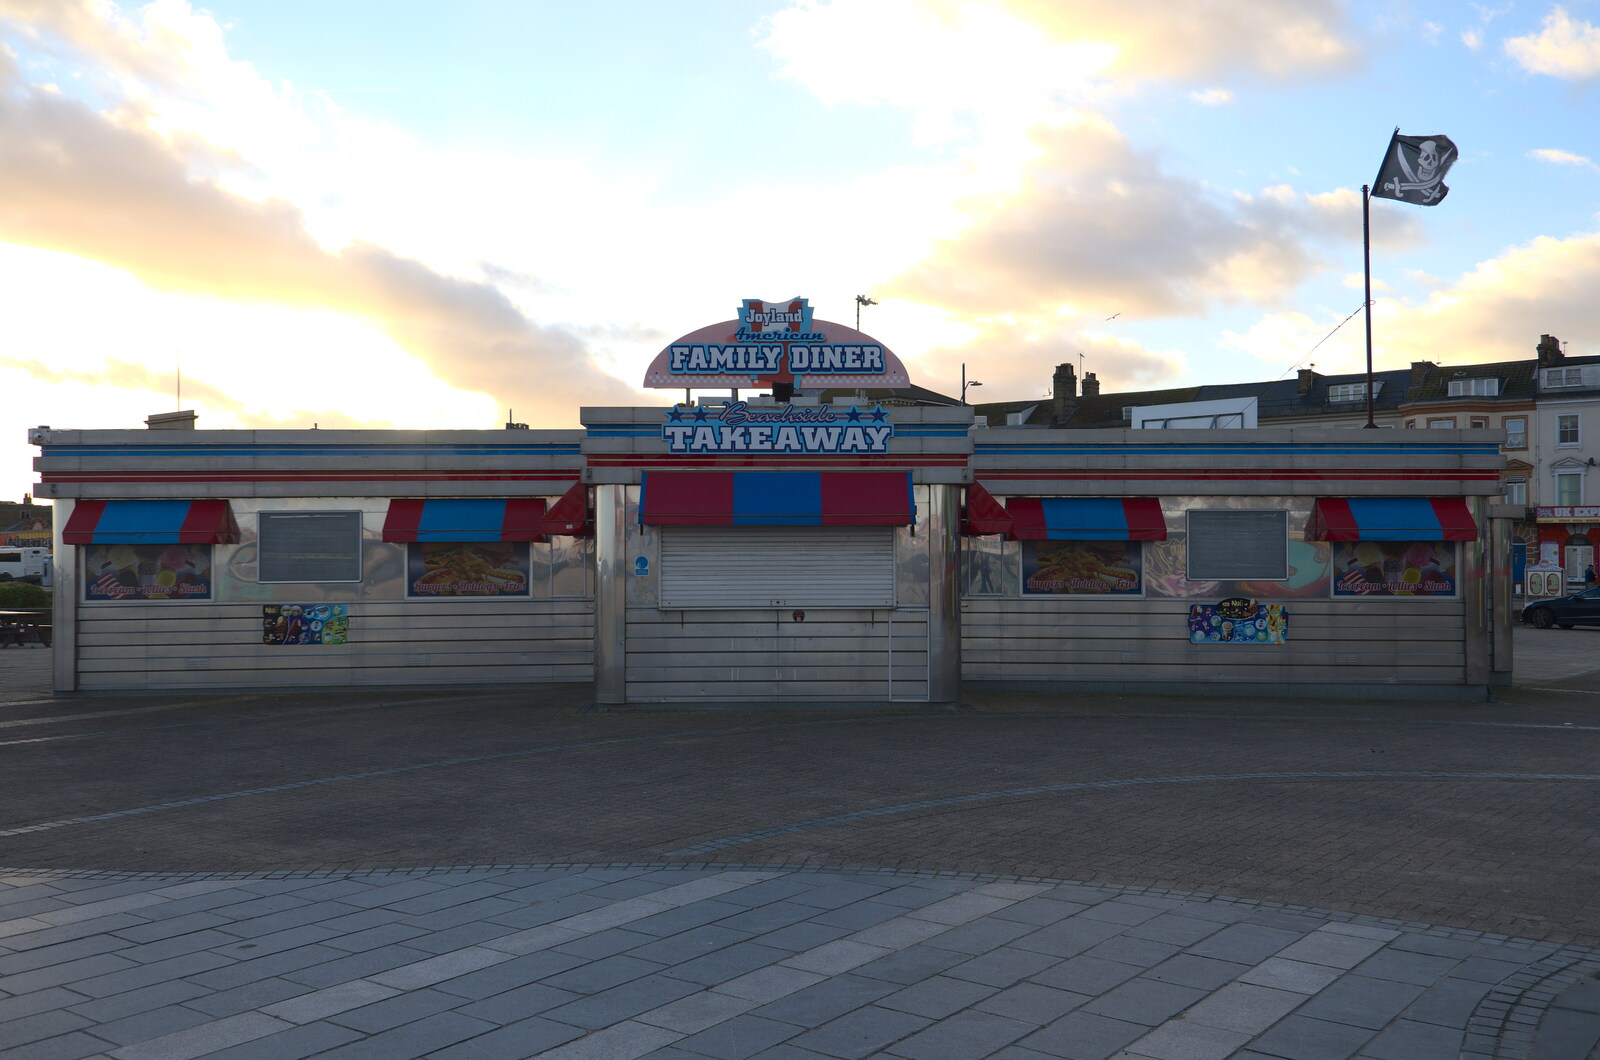 The Funland family diner is boarded up for winter from The Hippodrome Christmas Spectacular, Great Yarmouth, Norfolk - 29th December 2022